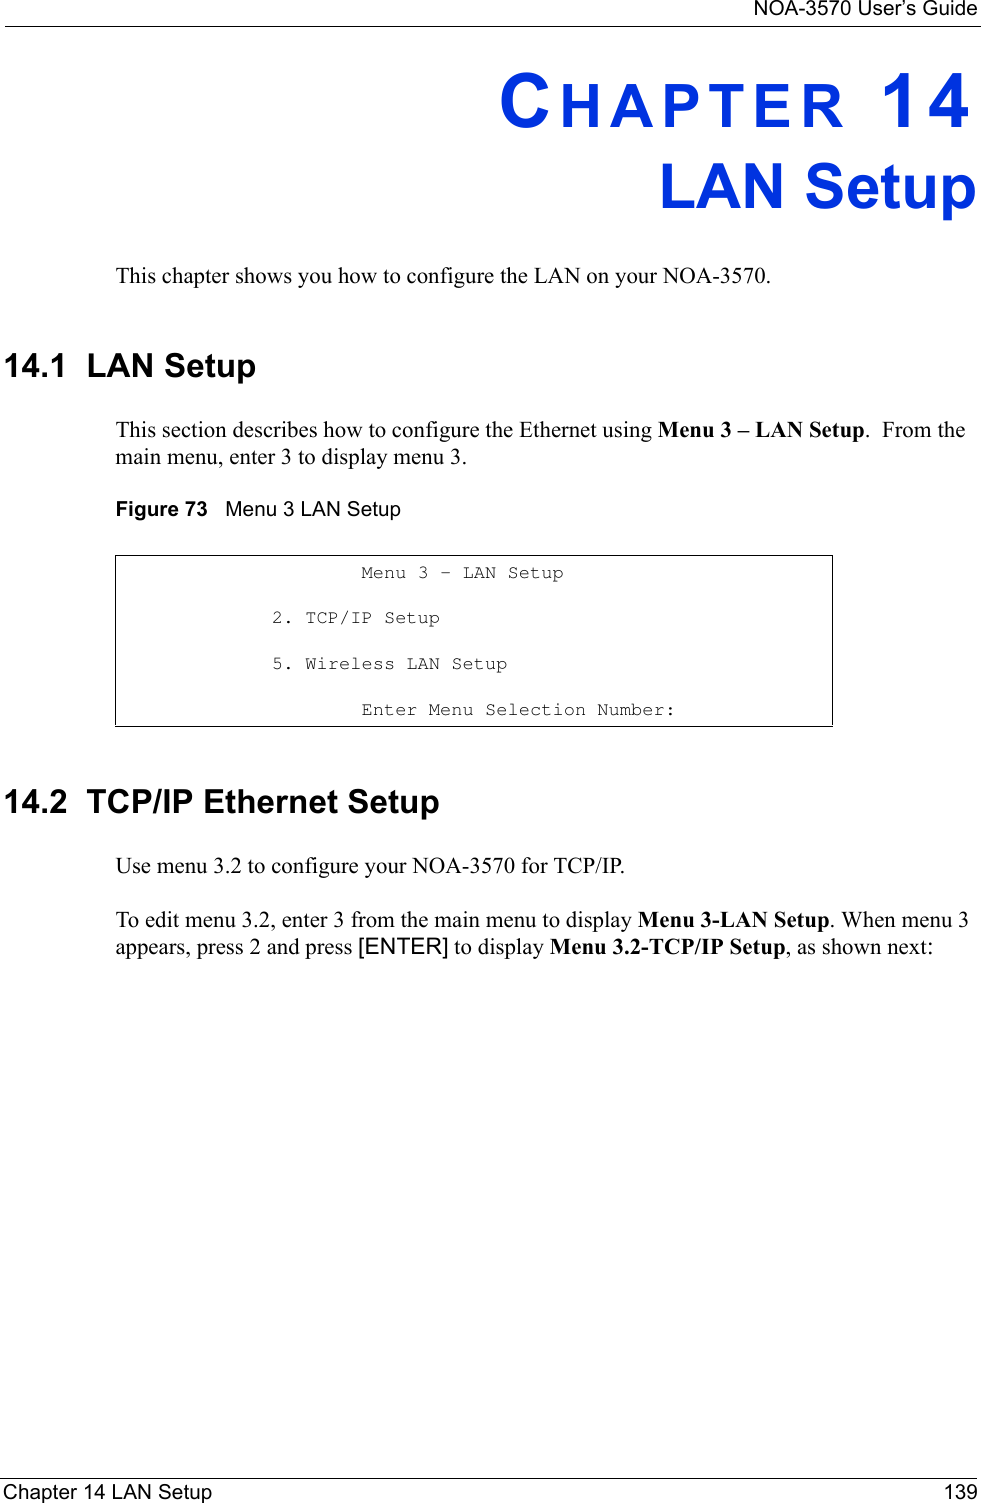 NOA-3570 User’s GuideChapter 14 LAN Setup 139CHAPTER 14LAN SetupThis chapter shows you how to configure the LAN on your NOA-3570.14.1  LAN SetupThis section describes how to configure the Ethernet using Menu 3 – LAN Setup.  From the main menu, enter 3 to display menu 3.Figure 73   Menu 3 LAN Setup 14.2  TCP/IP Ethernet SetupUse menu 3.2 to configure your NOA-3570 for TCP/IP.To edit menu 3.2, enter 3 from the main menu to display Menu 3-LAN Setup. When menu 3 appears, press 2 and press [ENTER] to display Menu 3.2-TCP/IP Setup, as shown next:        Menu 3 - LAN Setup                2. TCP/IP Setup                  5. Wireless LAN Setup        Enter Menu Selection Number: